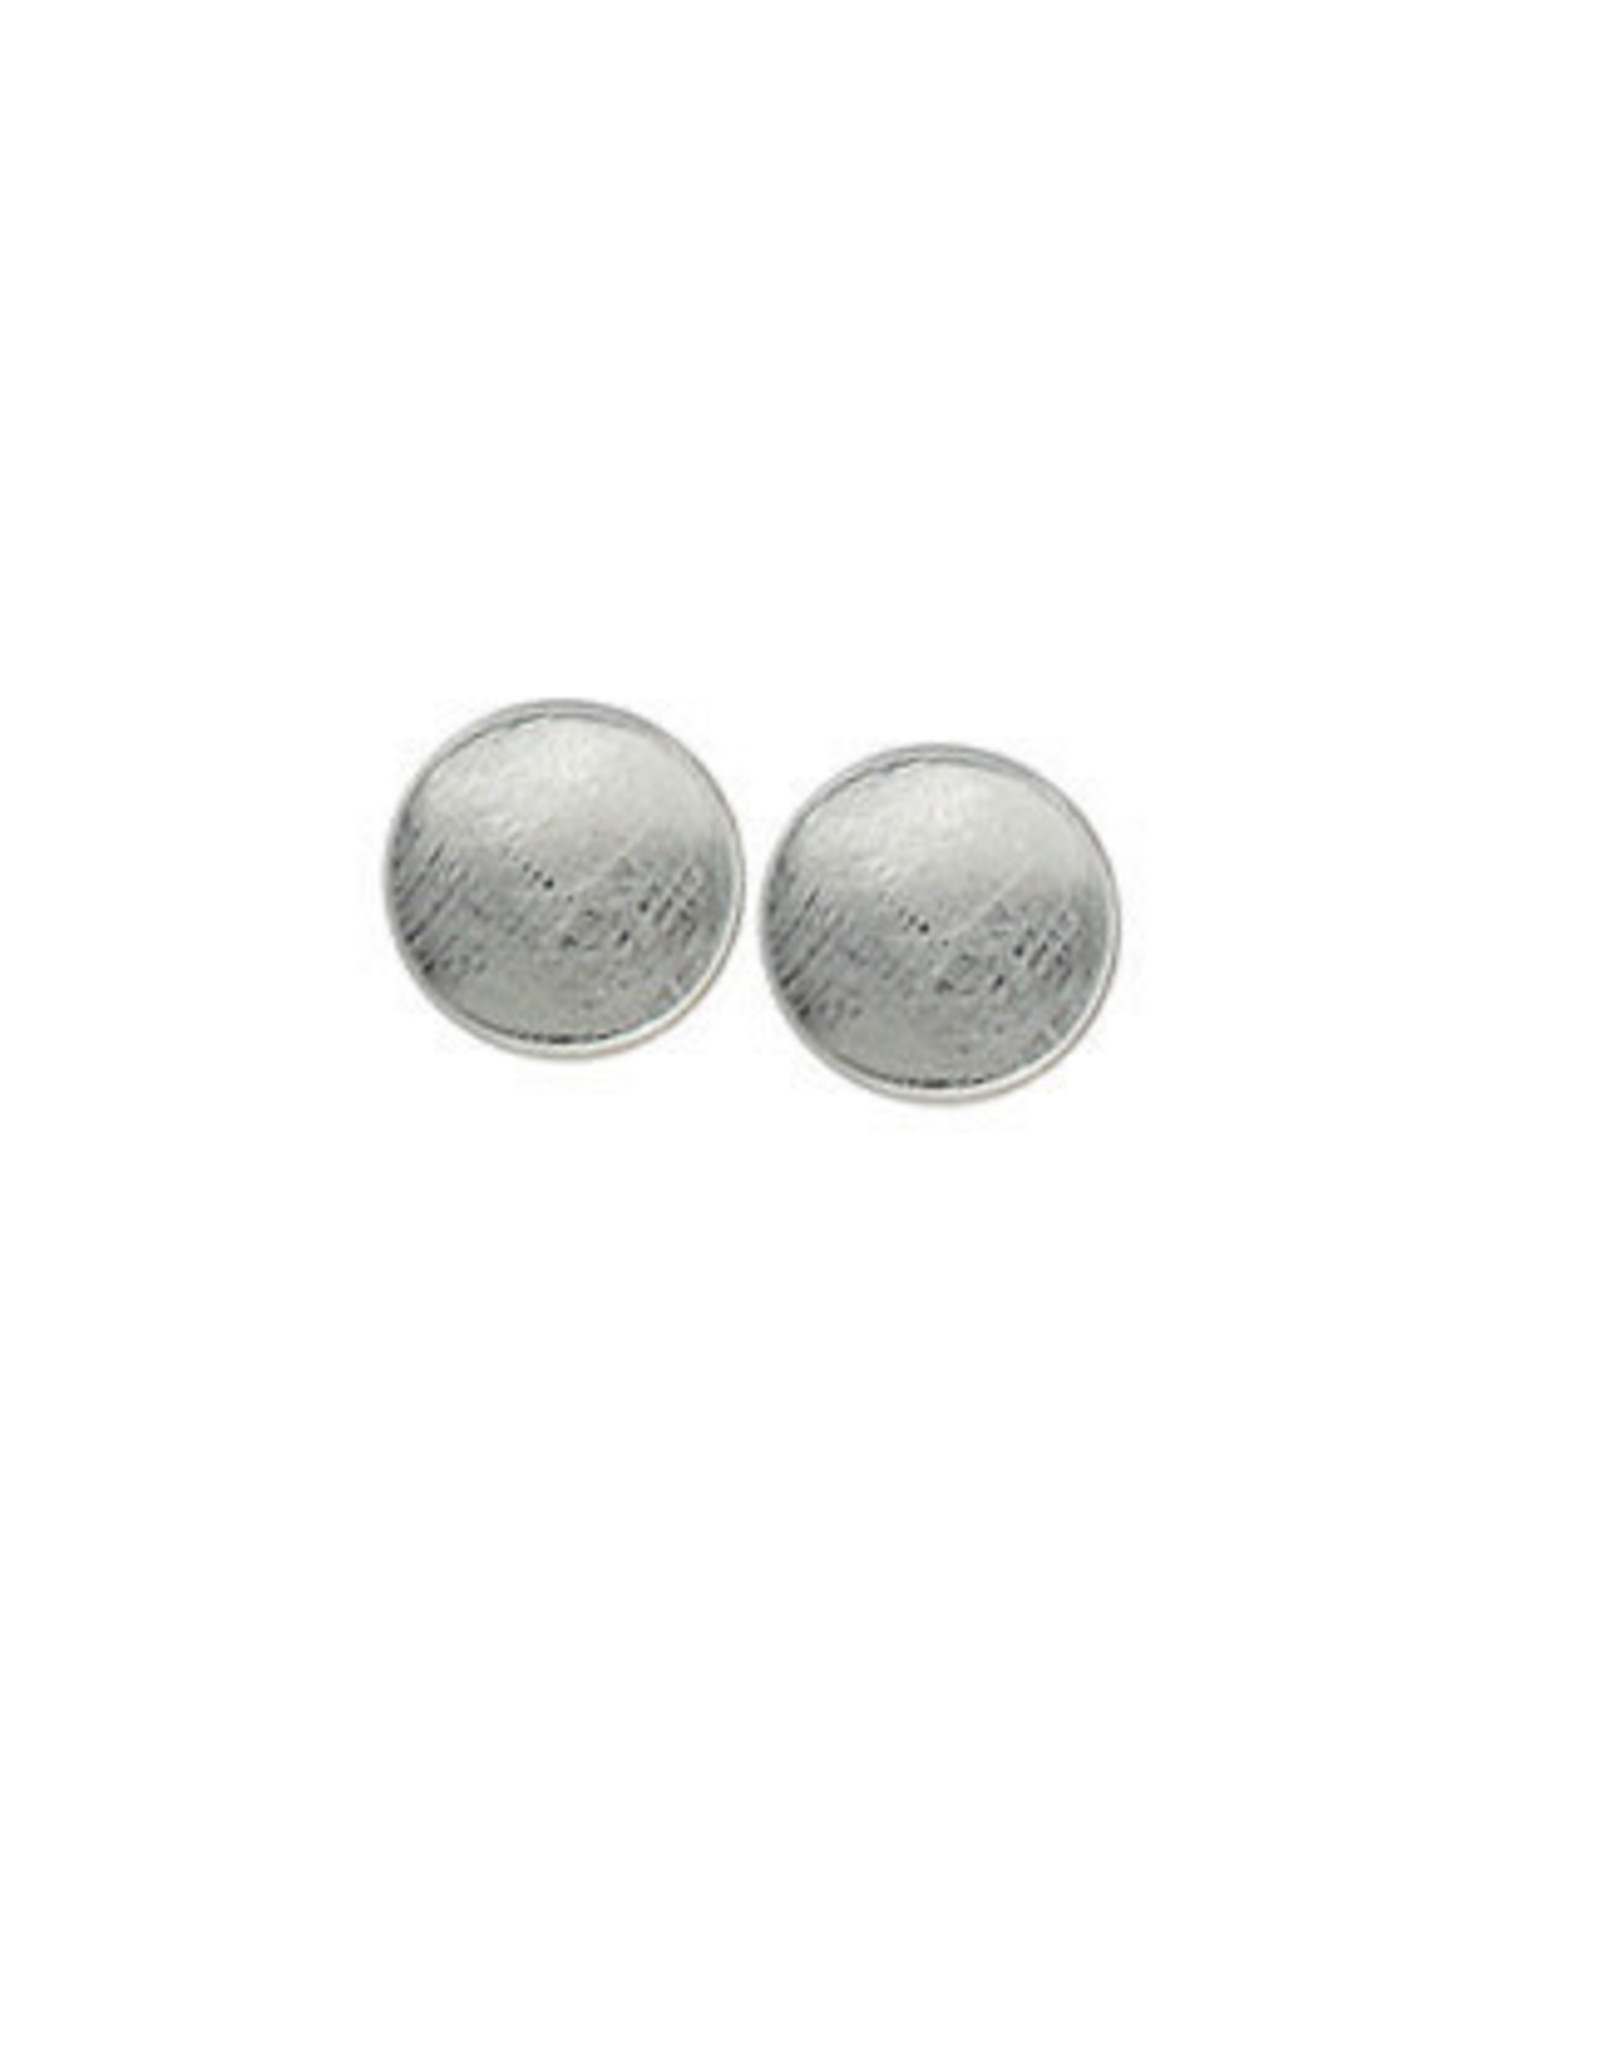 Boma ROUND STUD EARRING ICE SILVER